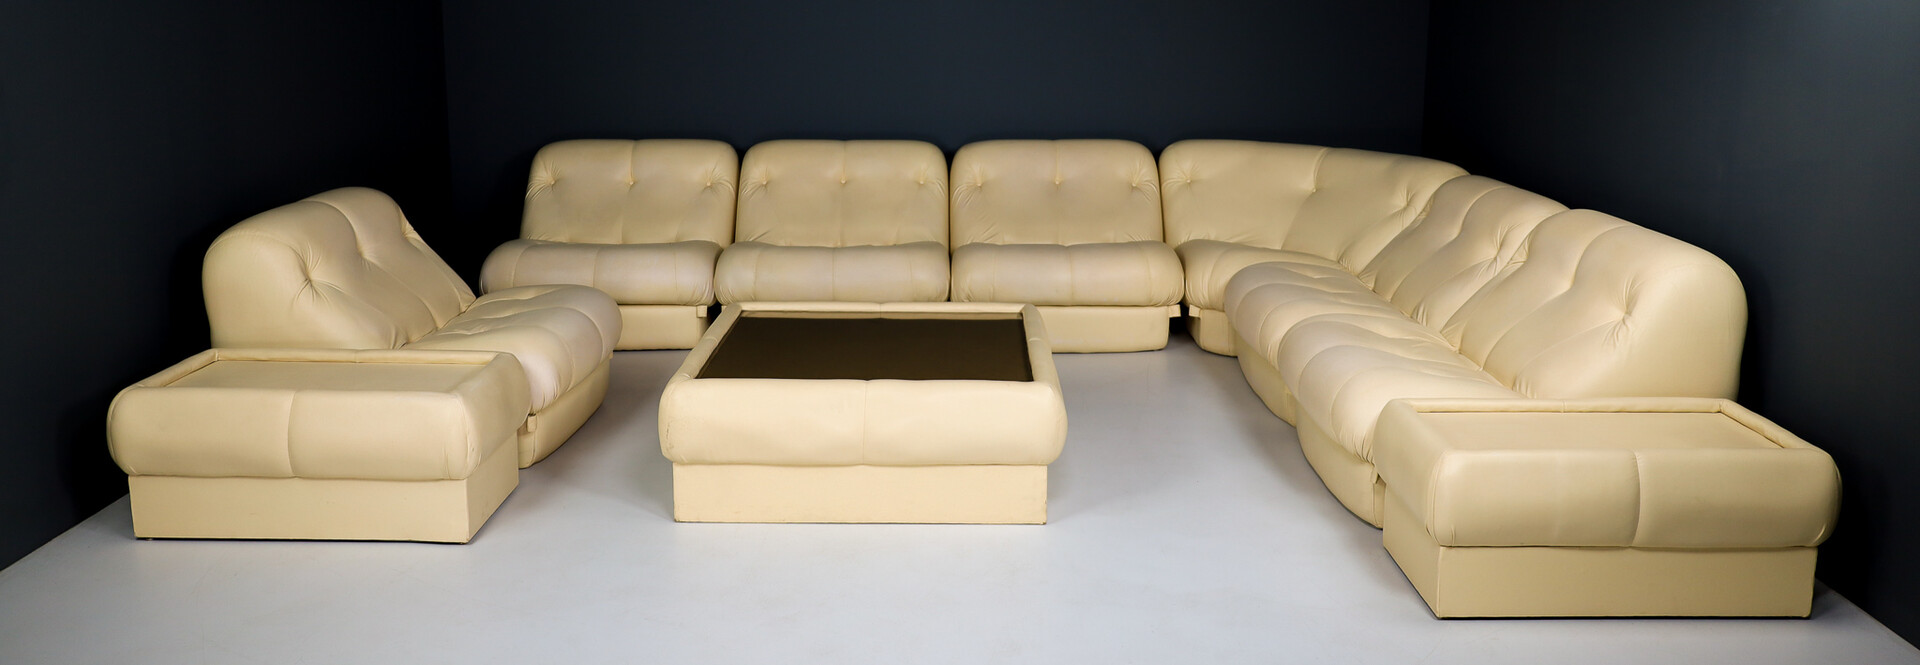 Mid century modern Sofa Landscape in Leather by Rimo Maturi for Mimo Padova´Nuvolone´ Italy 1970's Late-20th century